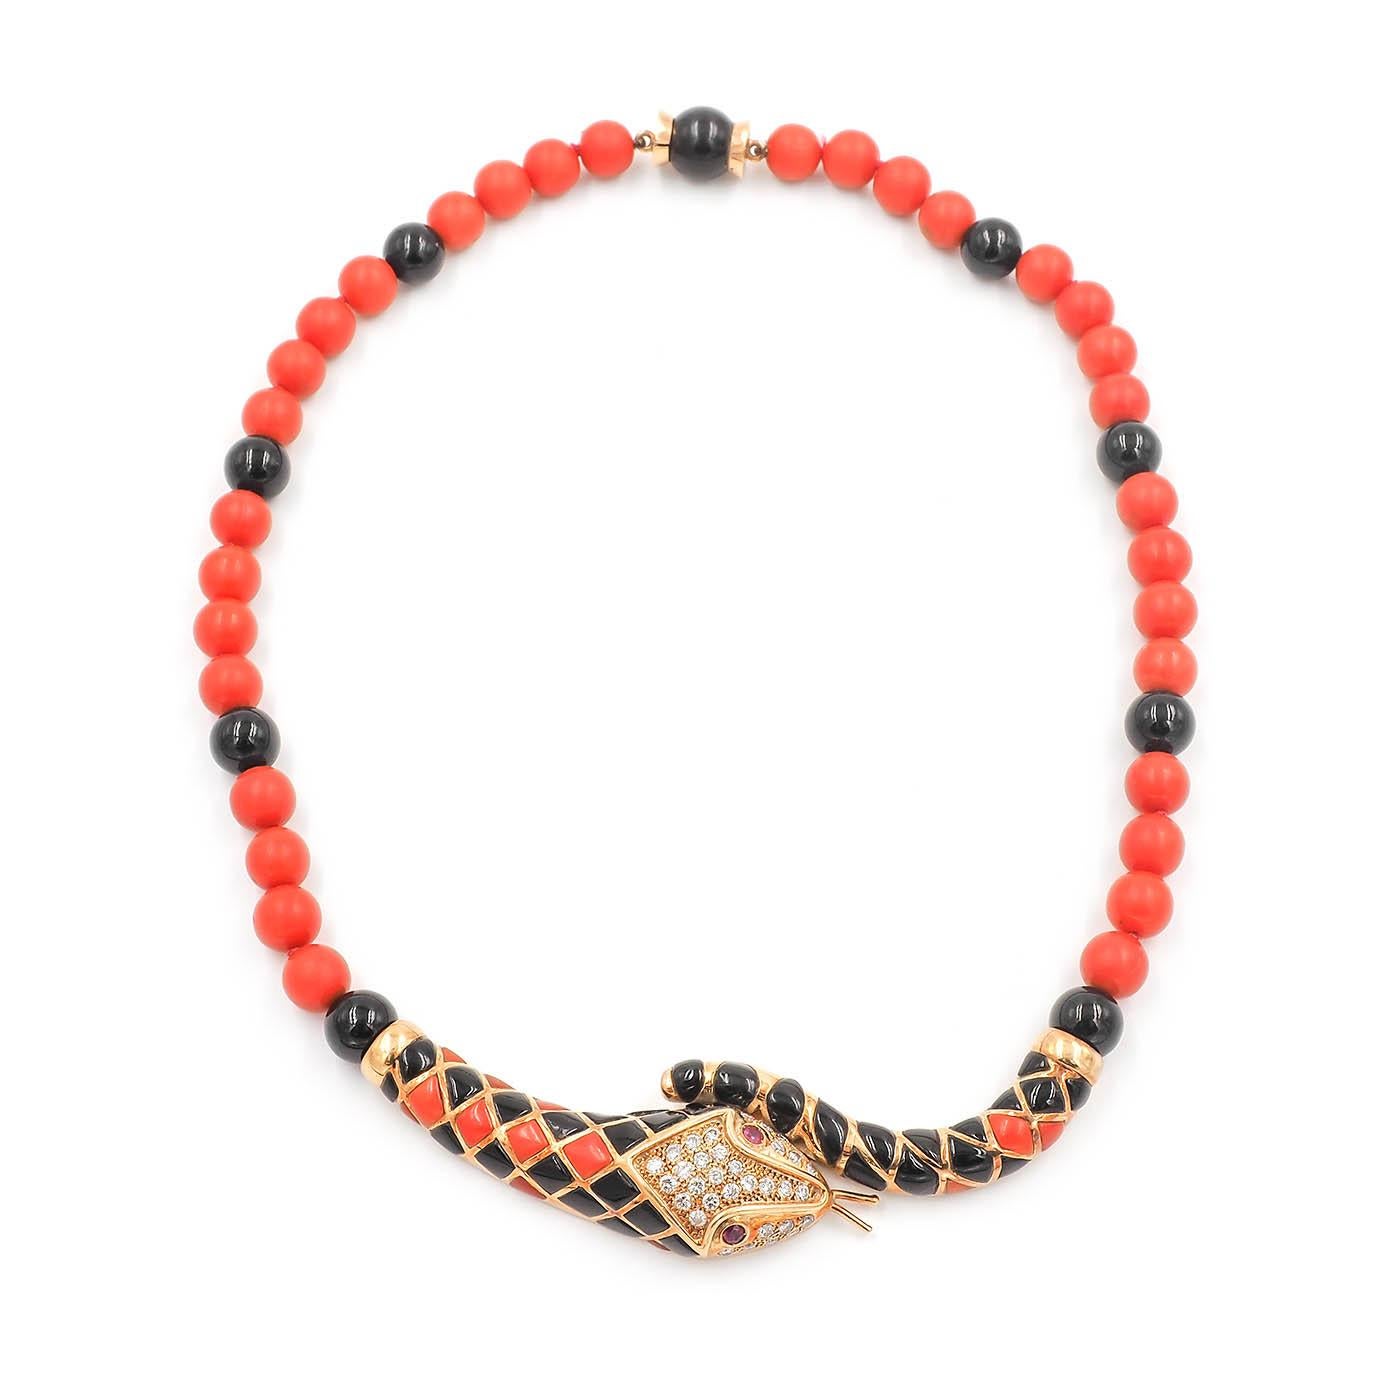 Vintage Coral & Onyx Snake Necklace composed of 18k yellow gold. With 32 Round Brilliant Cut diamonds set into the head (weighing approximately 0.64 carats in total), and 2 Round Cut natural ruby eyes weighing approximately 0.16 carats in total. The